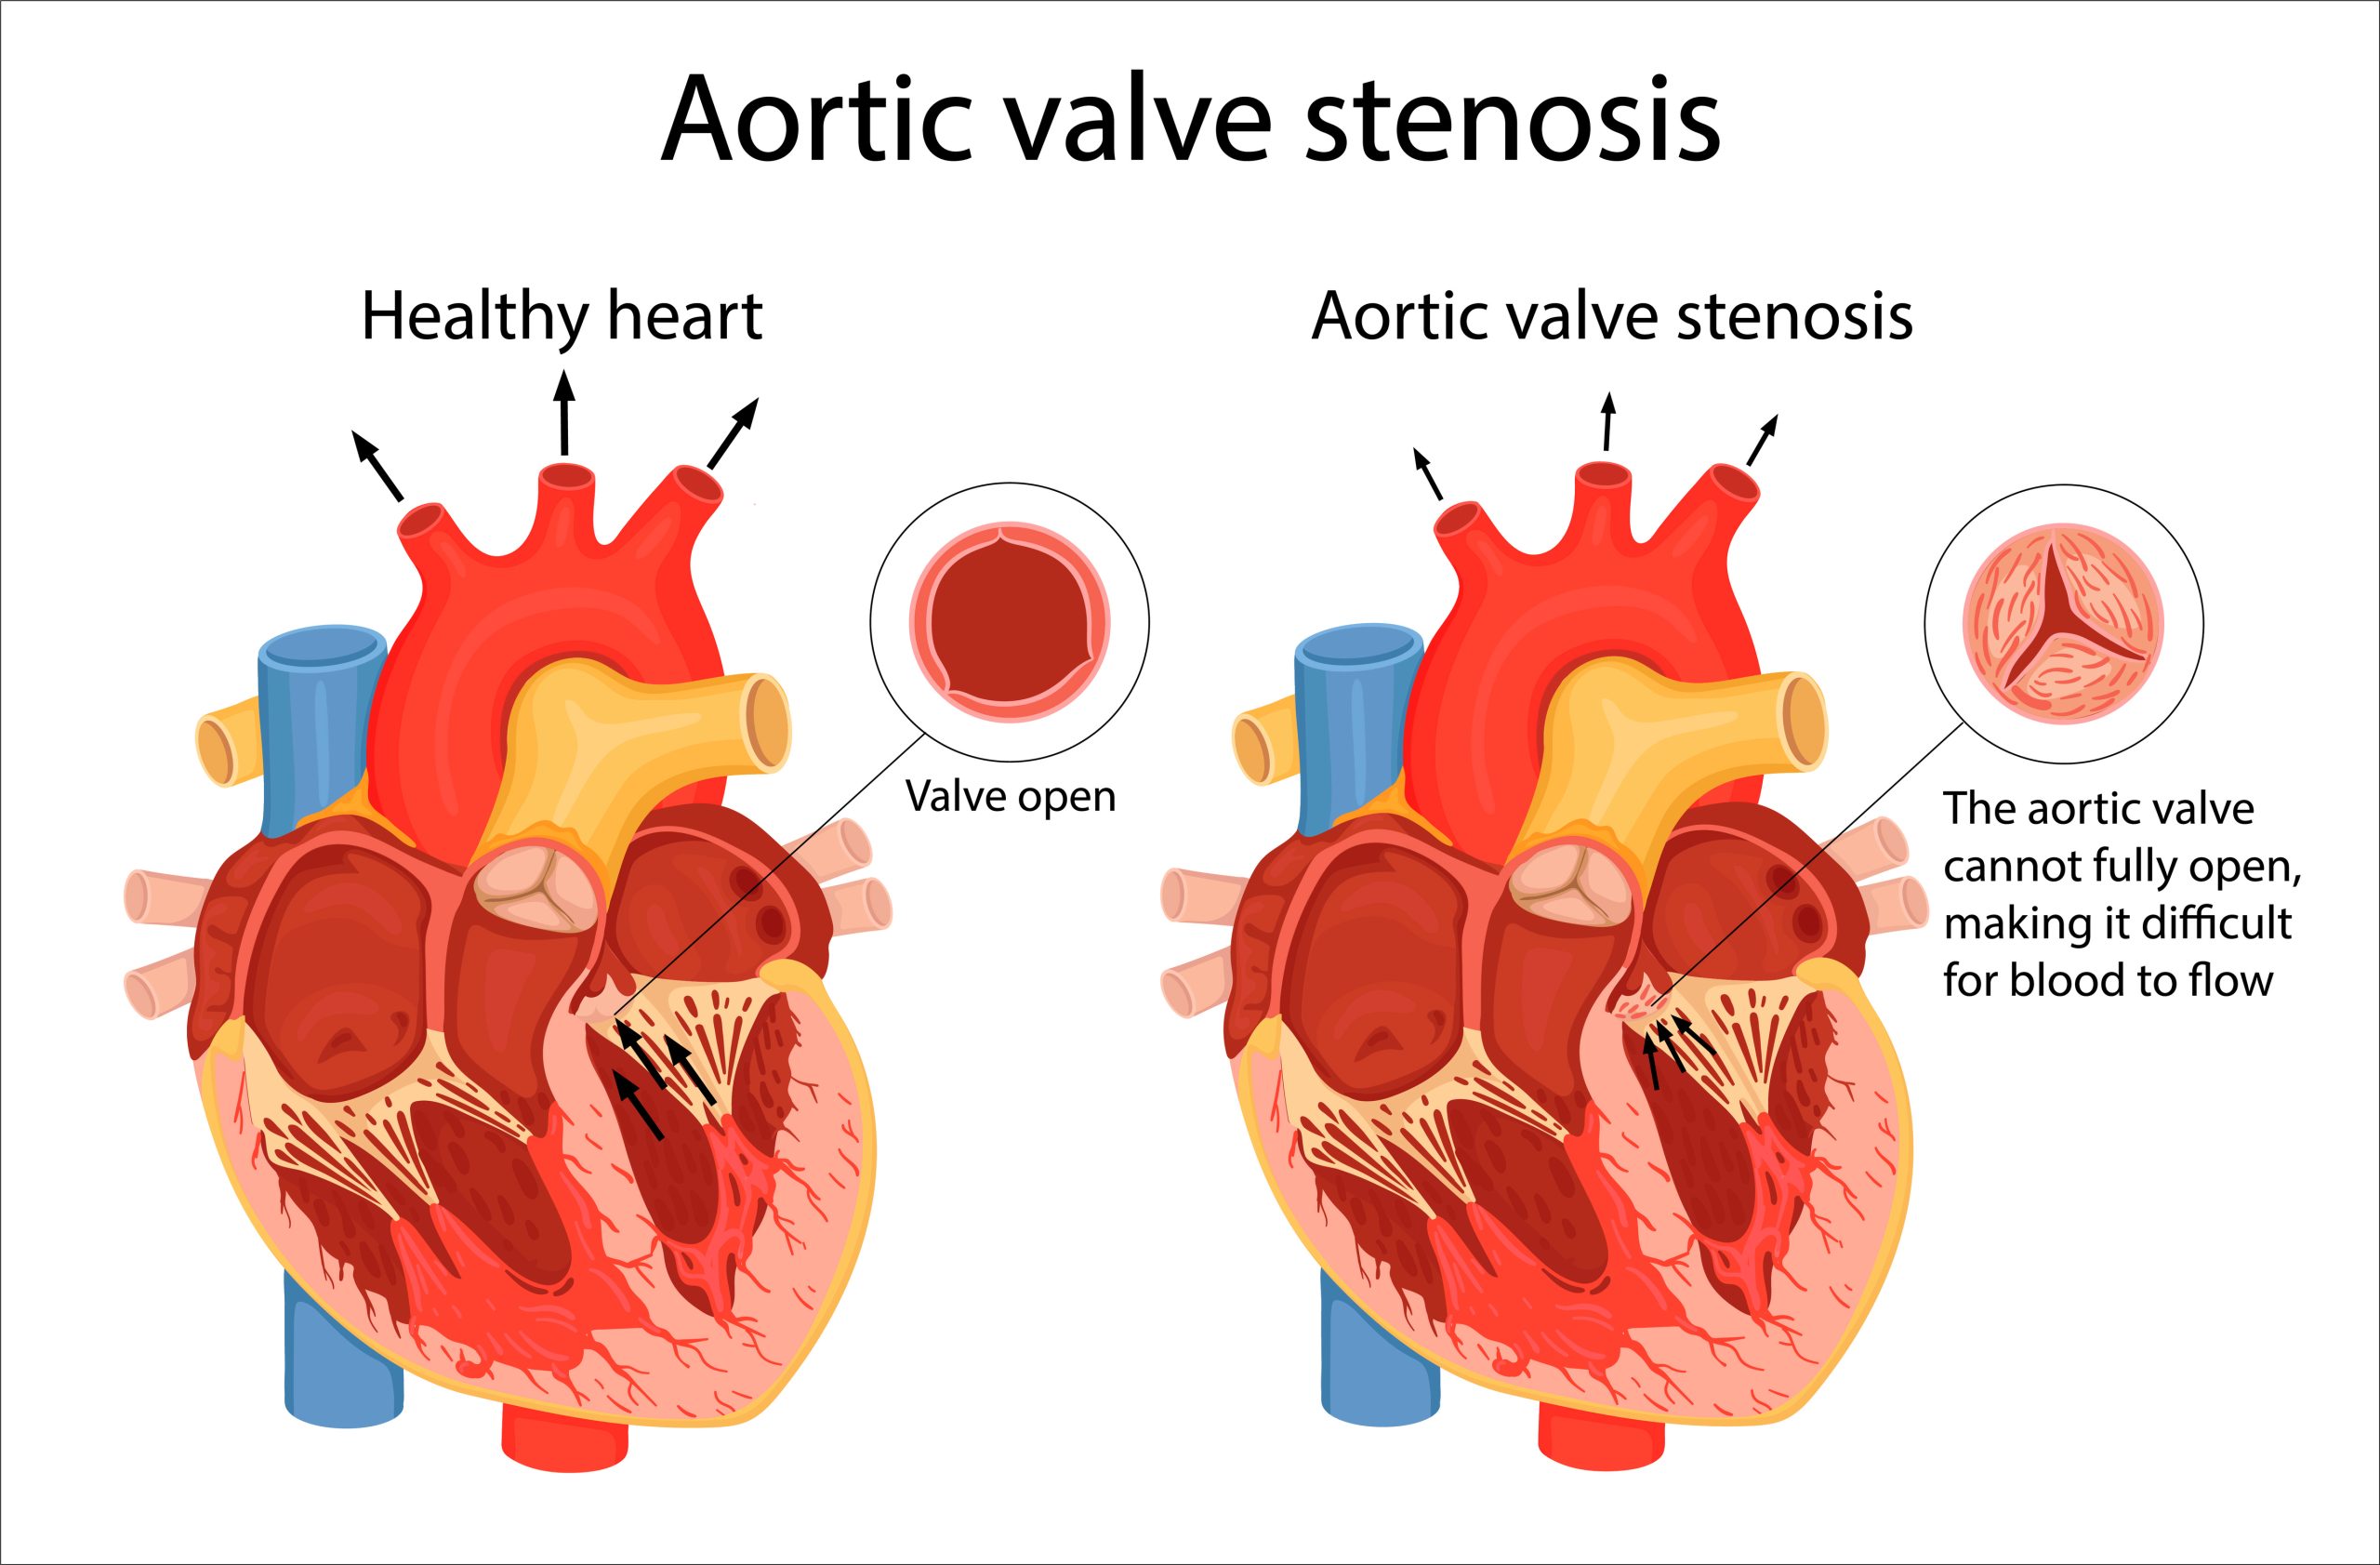 SMART Trial Reaffirms Hemodynamic Superiority of Tavr Self-Expanding Valve in Aortic Stenosis Patients with a Small Annulus Over Time and Regardless of Age